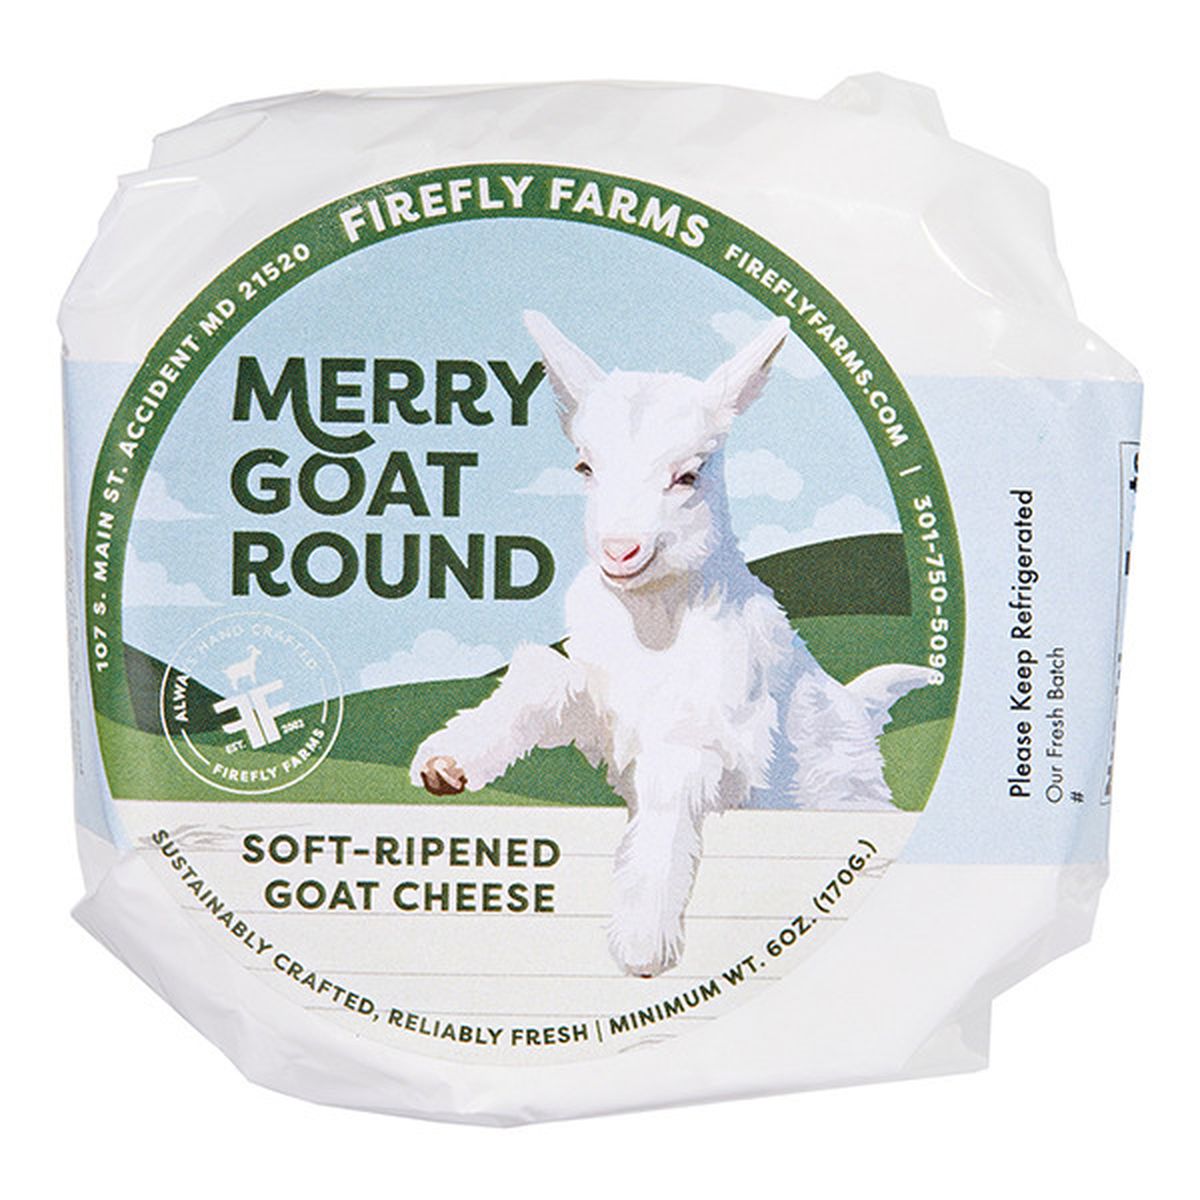 Calories in FireFly Farms Merry Goat Round Goat Cheese